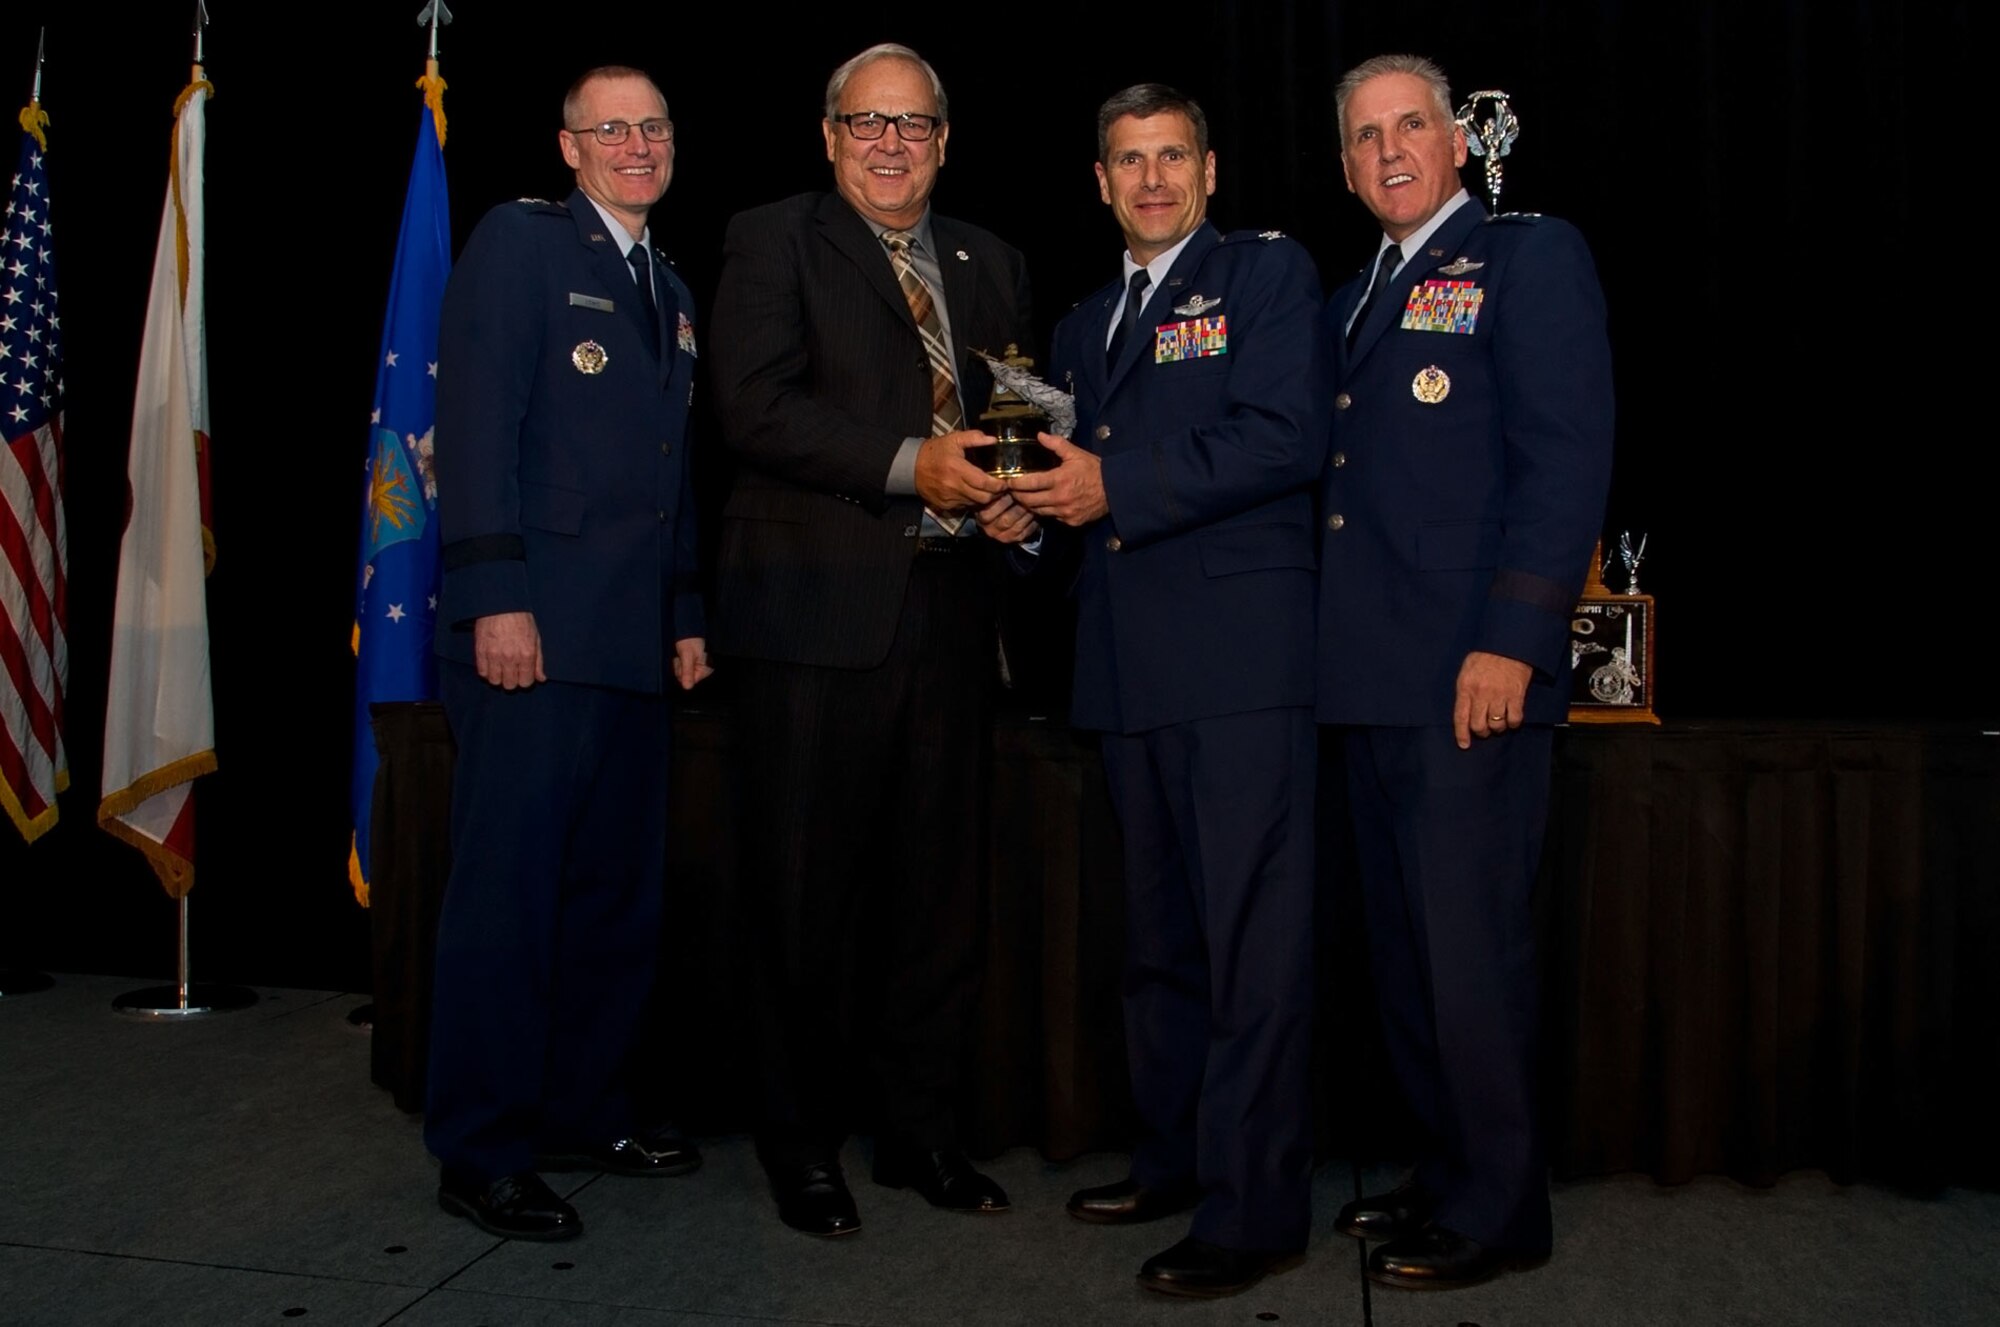 (L-R) Maj. Gen. Kenneth D. Lewis, Jr., director, Air, Space and Information Operations, Air Force Reserve Command, Robins Air Force Base, Georgia; Roger Rupp, Boeing Company and chair, Greater Riverside Chambers of Commerce Military Affairs Committee, Riverside, California; Col. Albert Lupenski, commander, 439th Airlift Wing, Westover Air Reserve Base, Massachusetts; and Maj. Gen. John C. Flournoy, Jr., commander Fourth Air Force, gather at the 16th Annual Raincross Trophy Dinner Nov. 19, 2015, to present the Raincross Trophy, signifying the best wing in the numbered Air Force, to the 439 AW. (U.S. Air Force photo/Senior Master Sgt. Keith Baxter)
